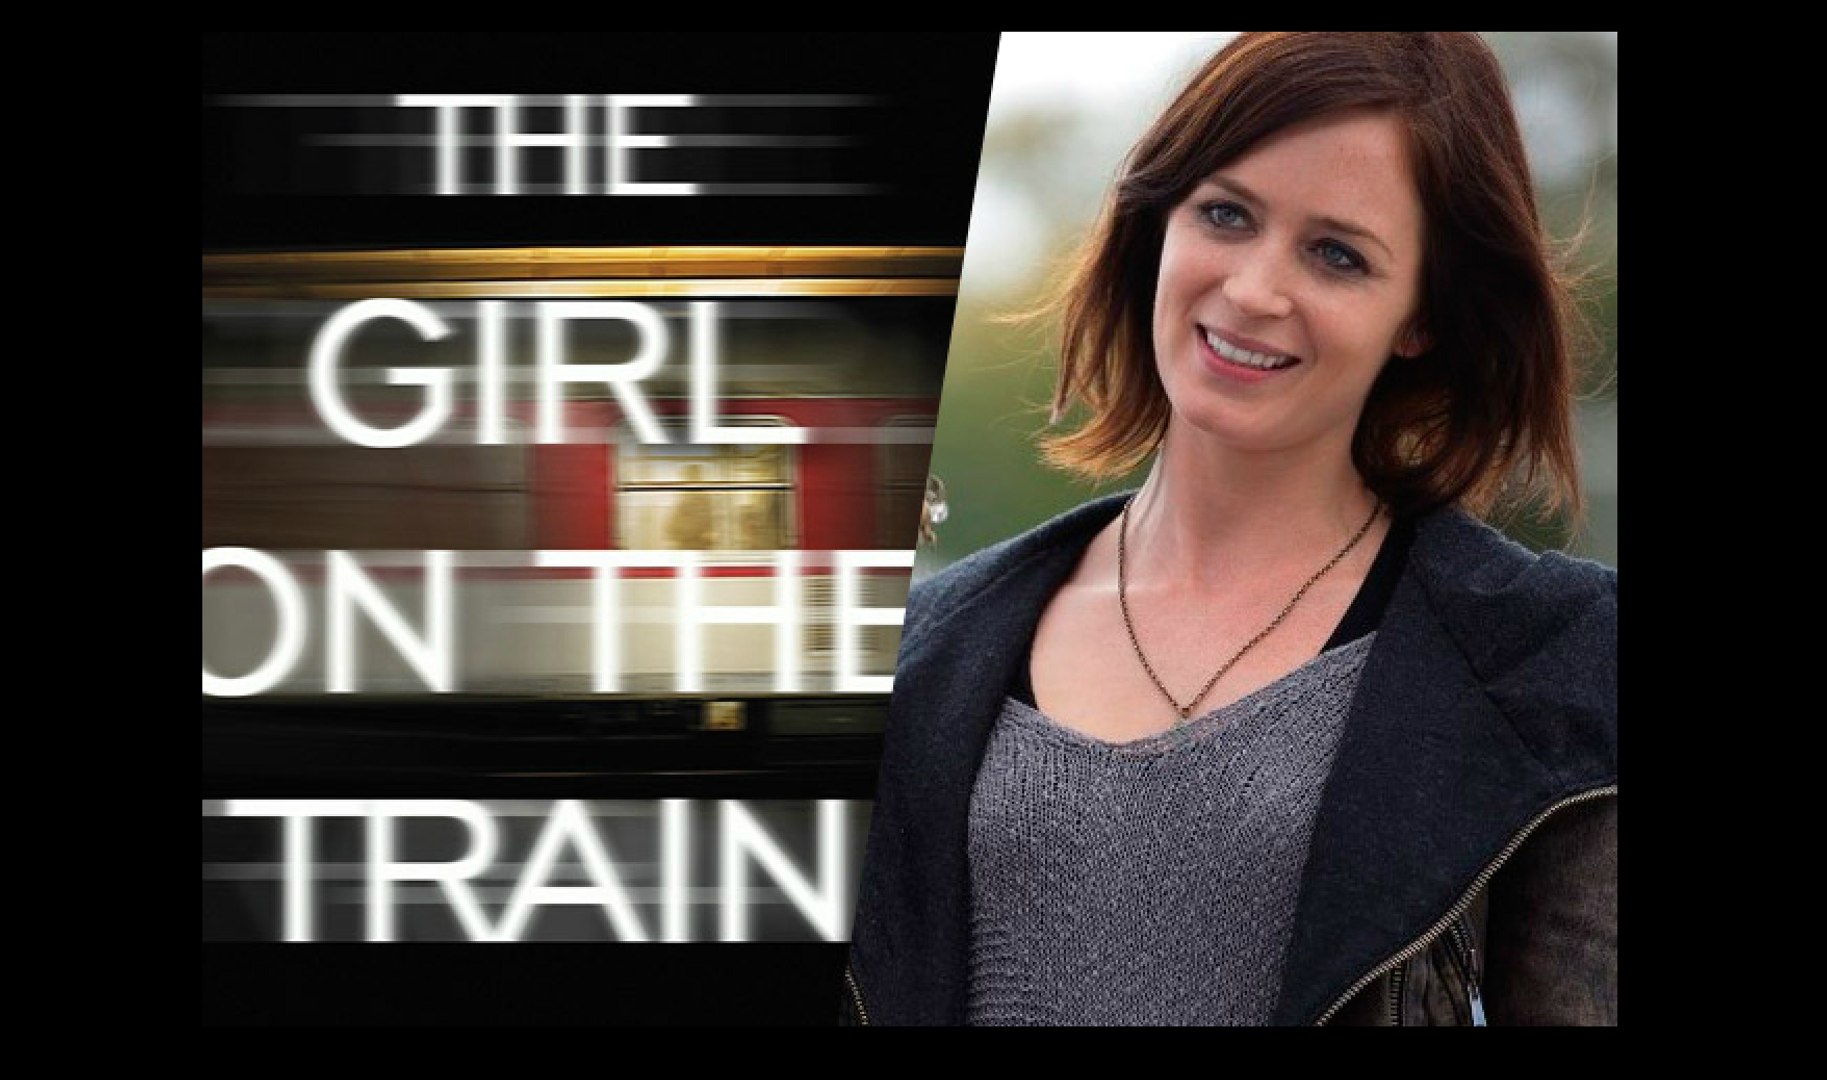 The Girl On The Train Movie Download